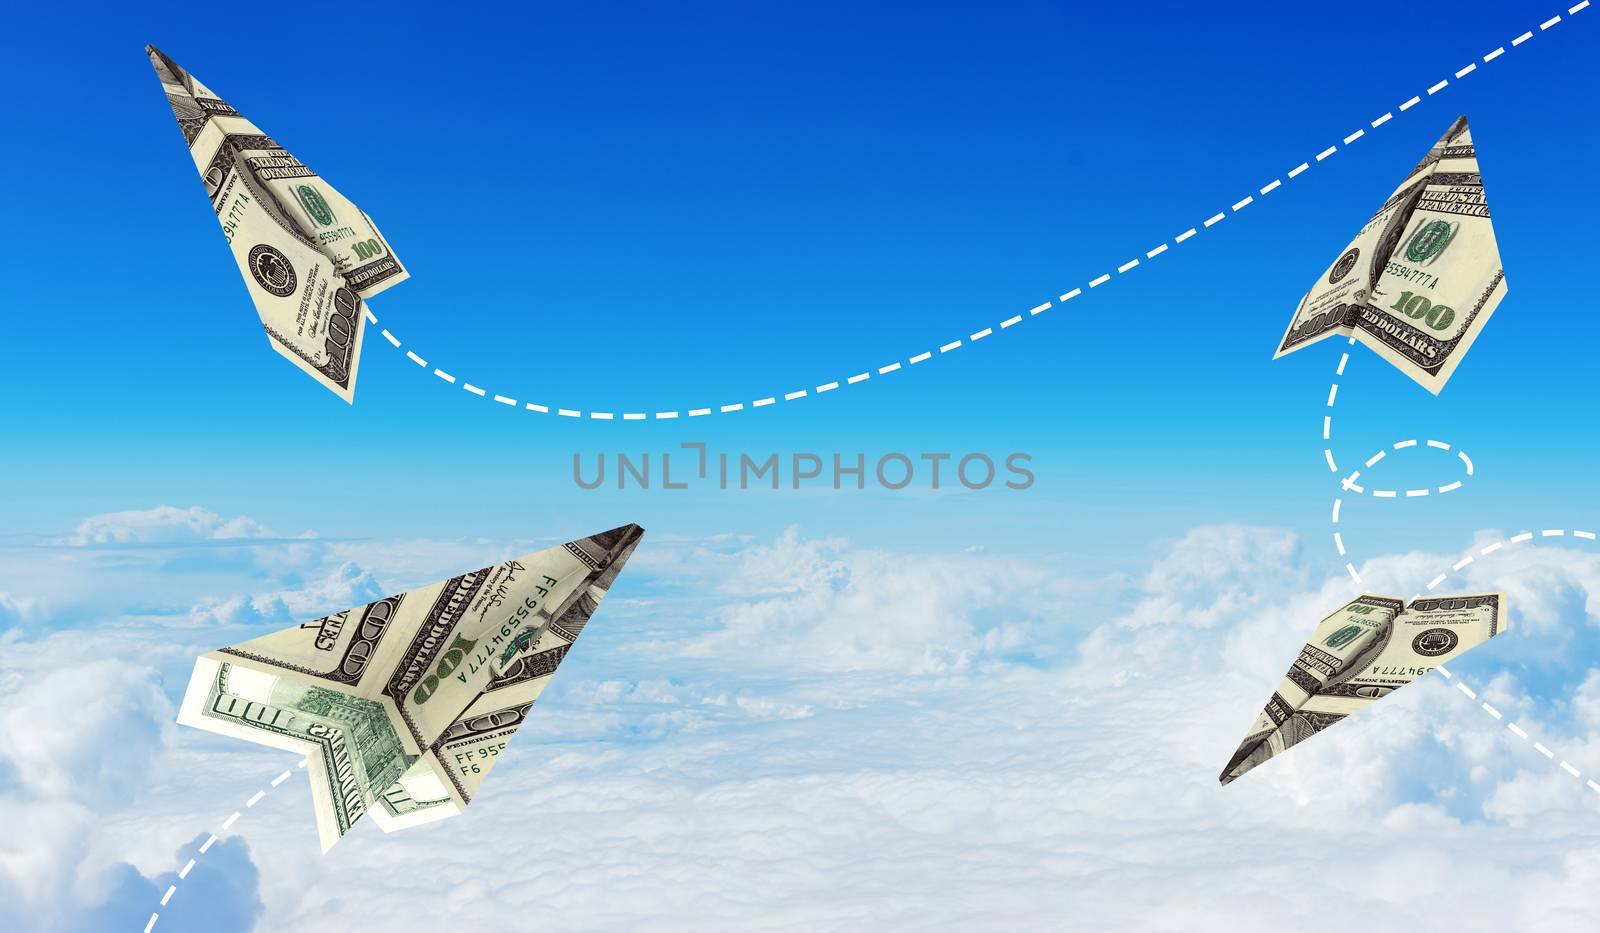 Set of dollar airplanes in blue sky with clouds, money concept